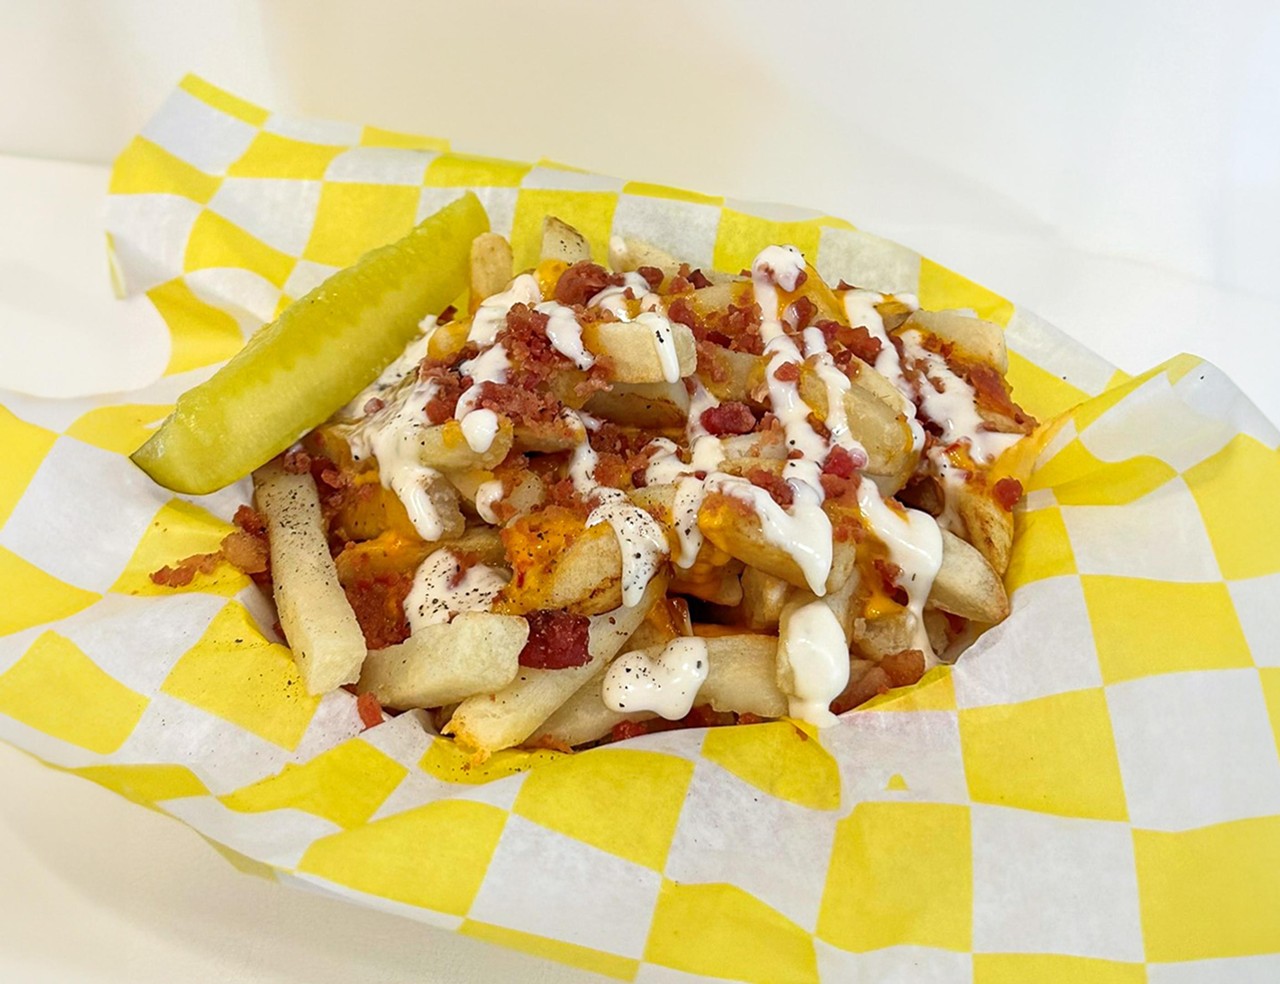 PICKLE RANCH LOADED FRENCH FRIES
Cheddar, Bacon, PICKLE Ranch Loaded French Fries! 
Chester's Gators & Taters